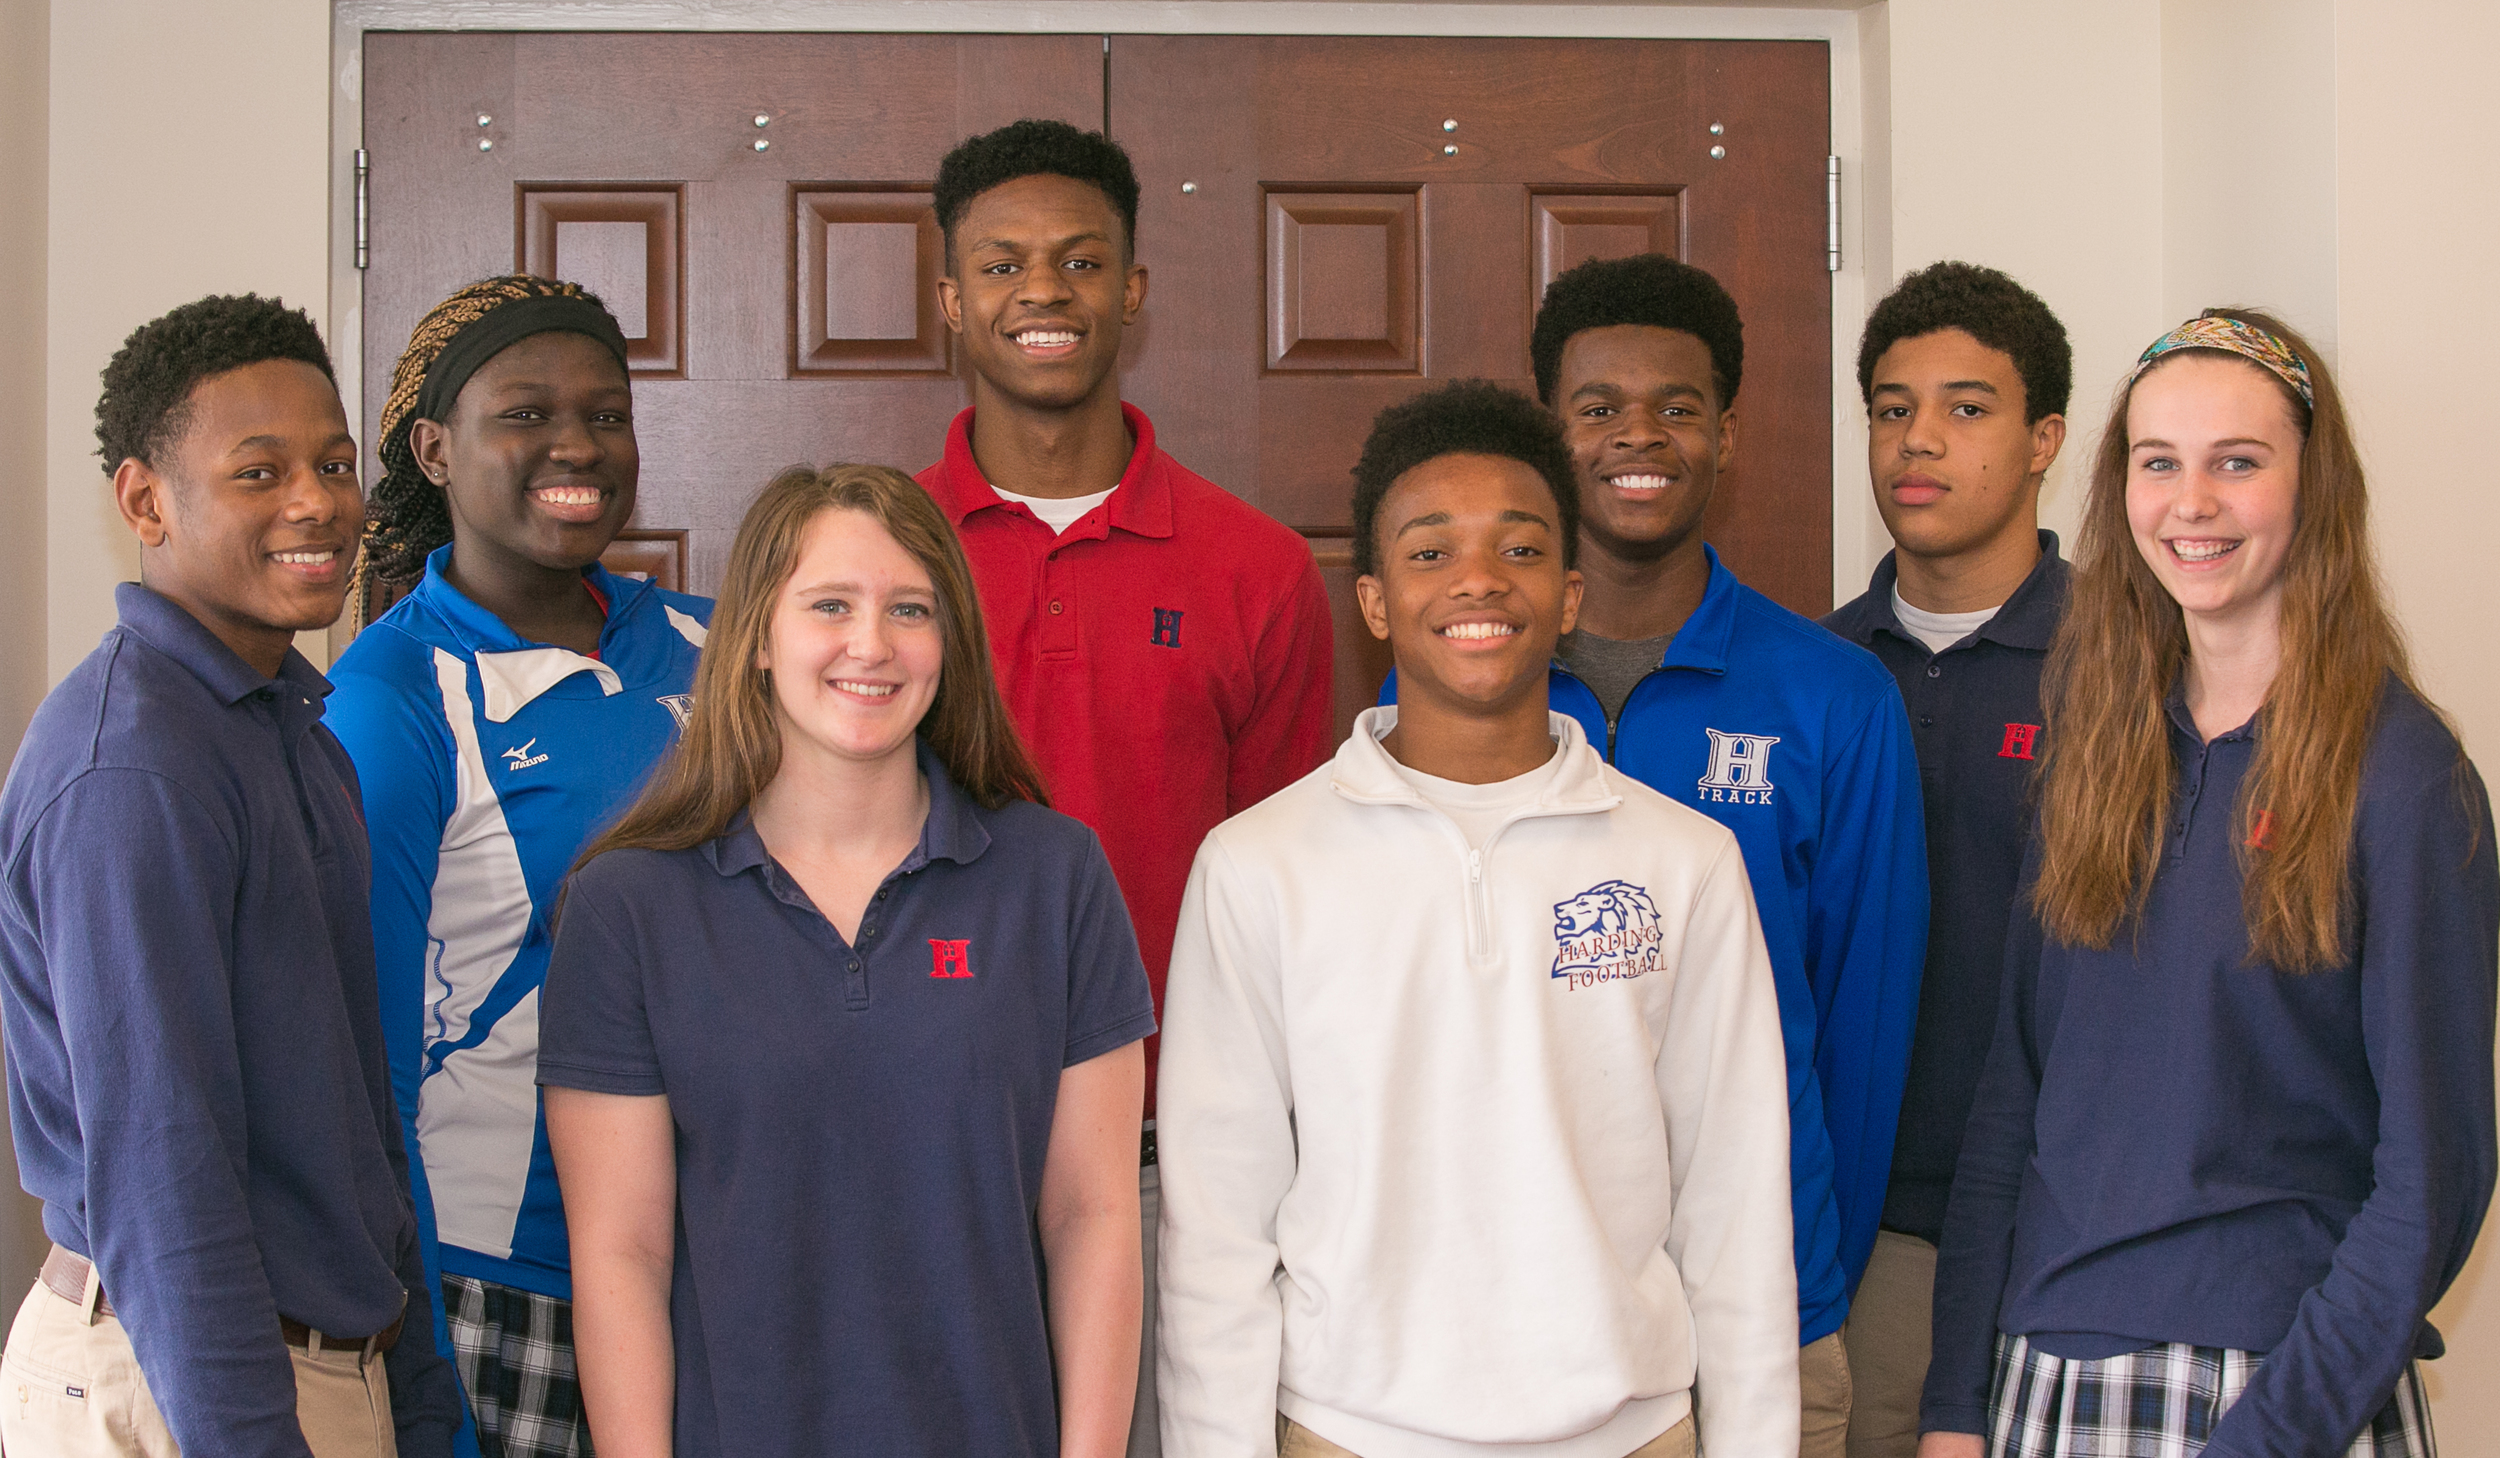 Front row: Chris Smith, Alyssa Hale, Calvin Austin, Anna HornerBack row: Antoinette Lewis, Anthony Yarbrough, Troy West, James Townsdin